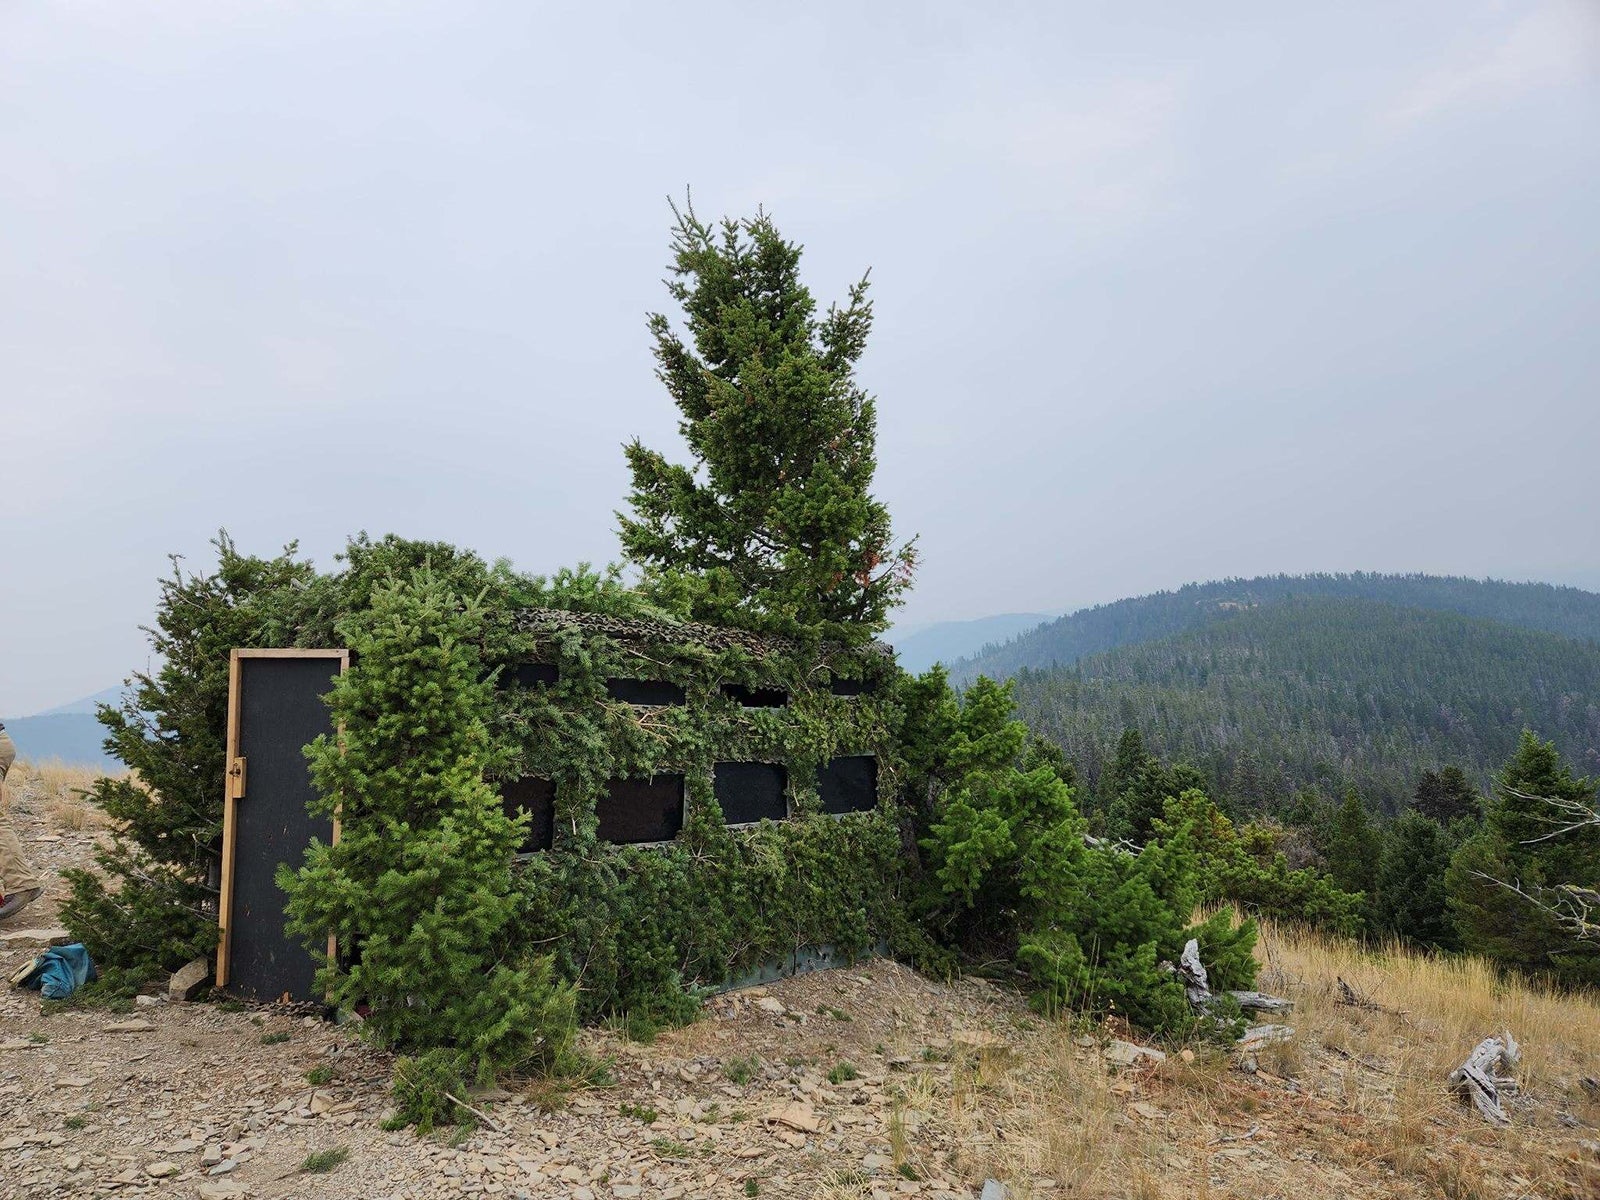 A look at the outside of the trapping blind, which has been heavily camouflaged with conifer branches to make it as inconspicuous as possible. While heavy camouflage is not necessary to trap most raptors, it is critical for Golden Eagles, which can be acutely aware of irregularities in their surroundings. Photo by Sarah Scott